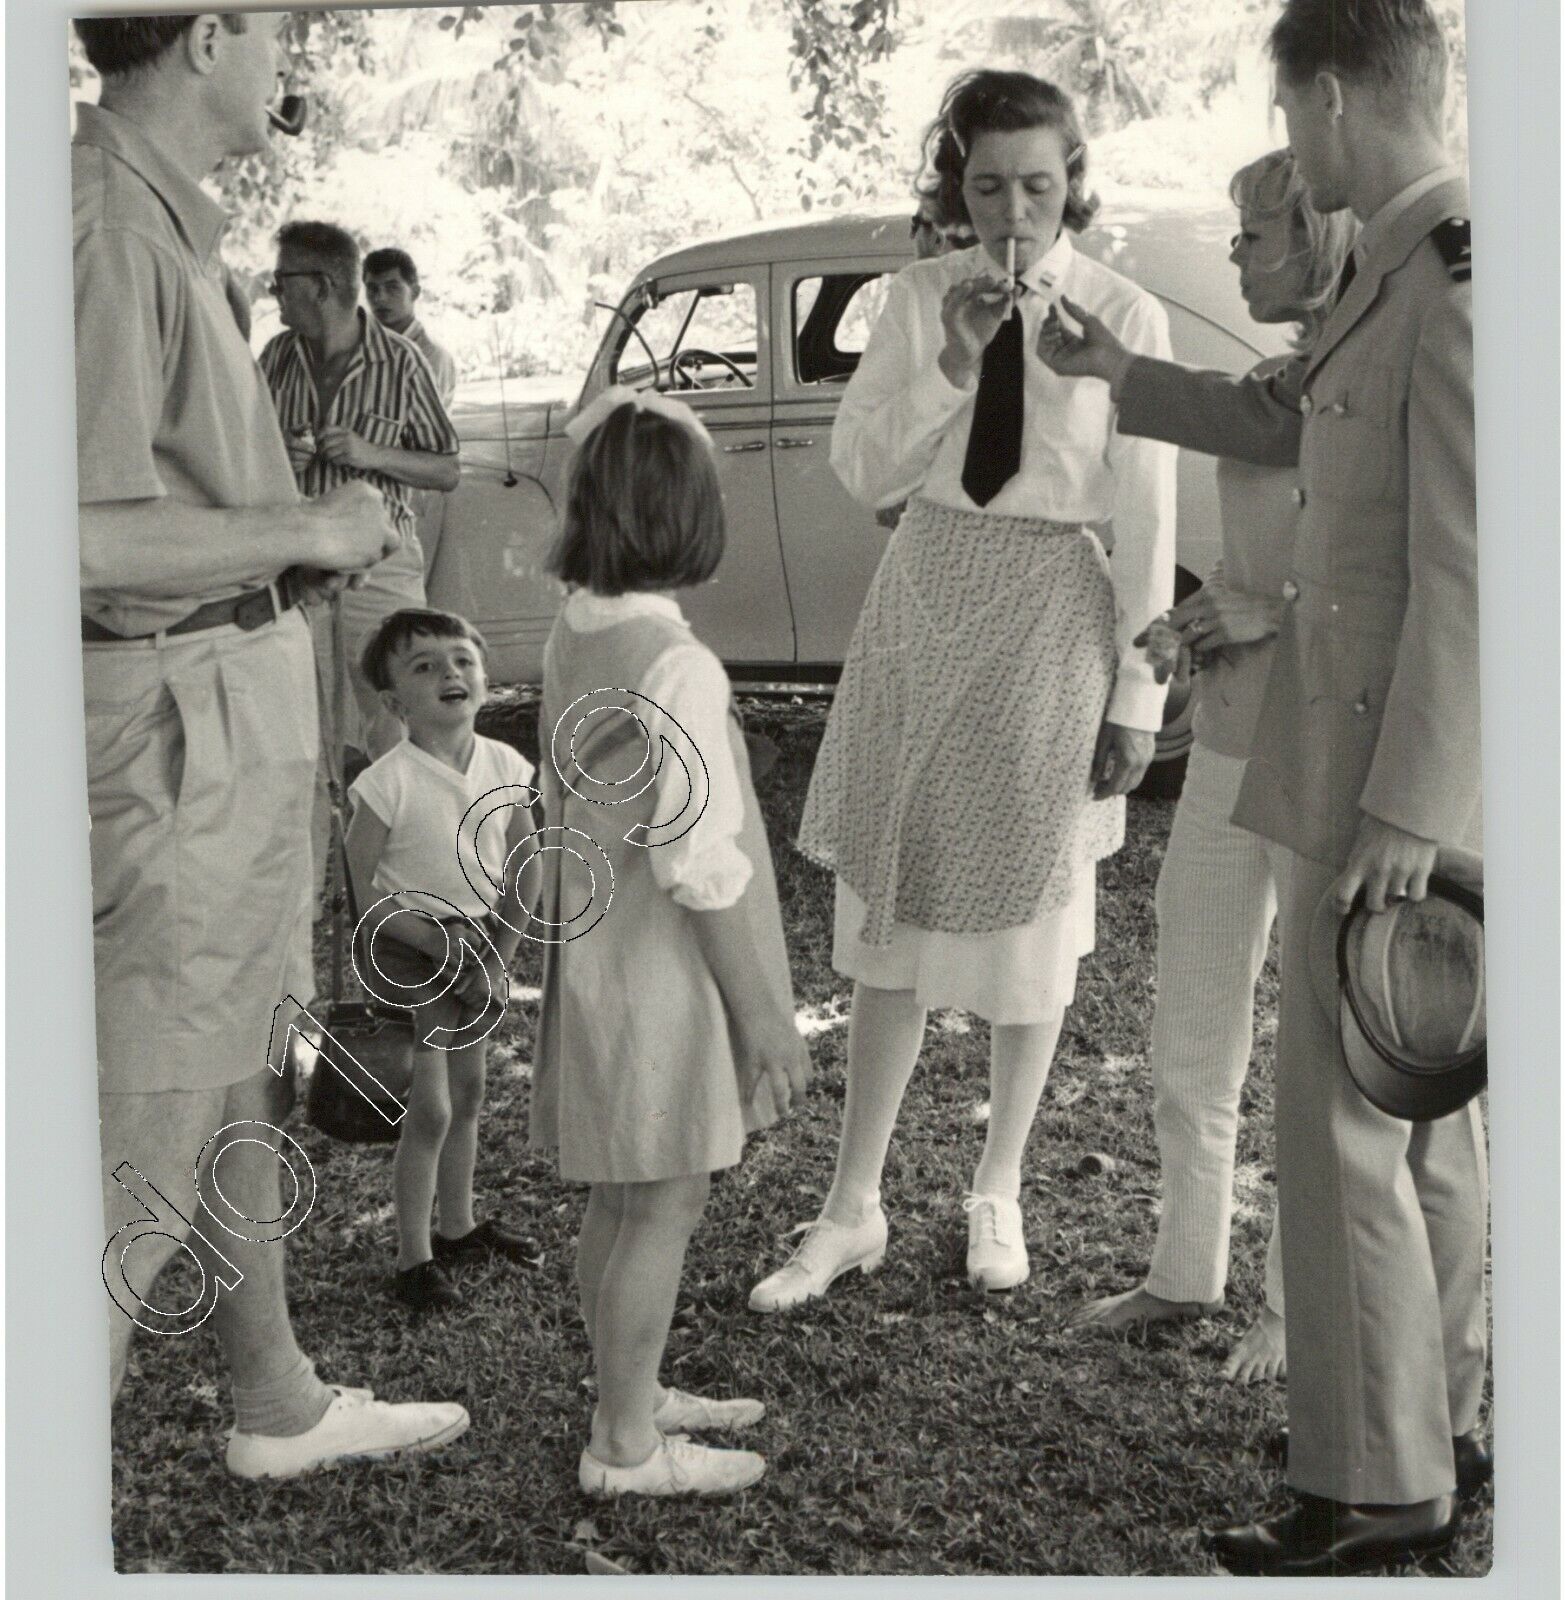 CANDID Portrait of a FAMILY at LEISURE, 1950s Unusual VERNACULAR Press Photo